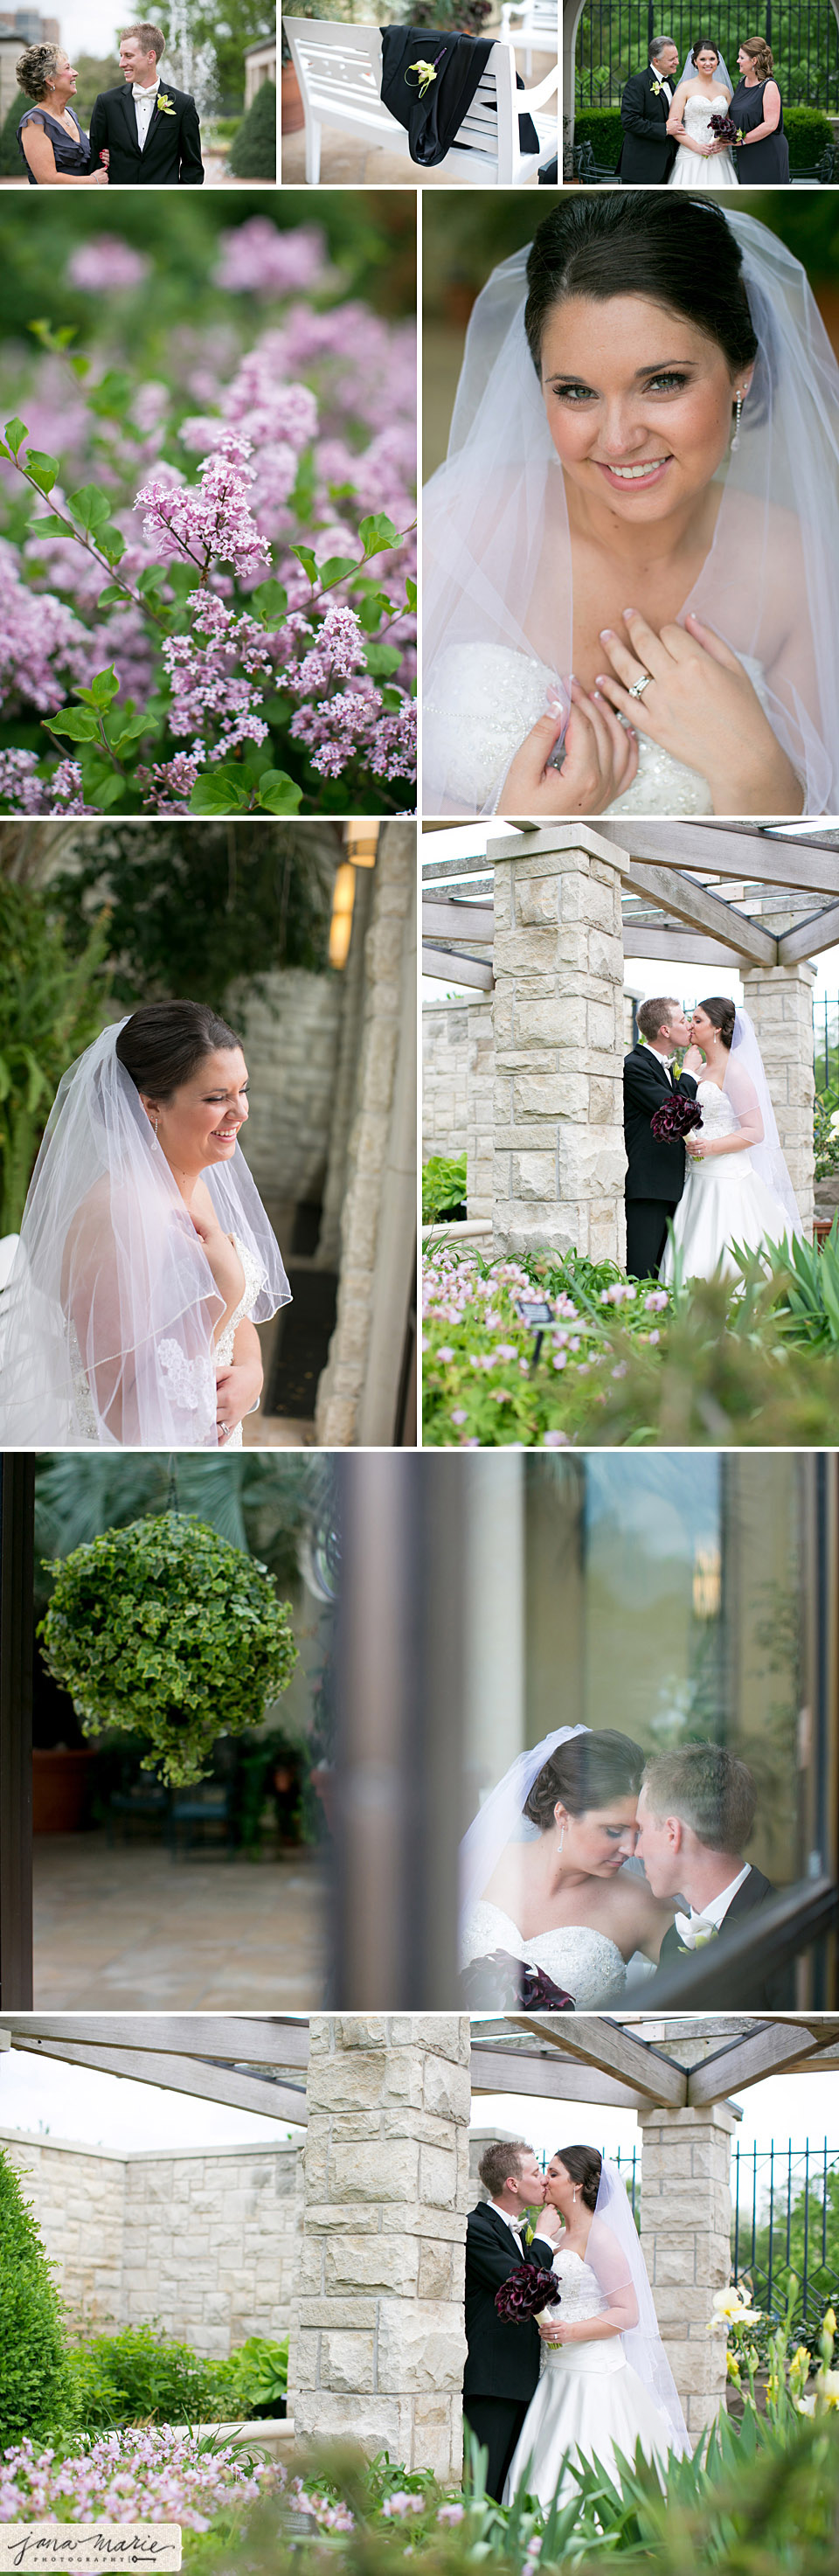 Bodenstab family, bride portraits, Beloved images, Jana Marie Photography, KC weddings, candids